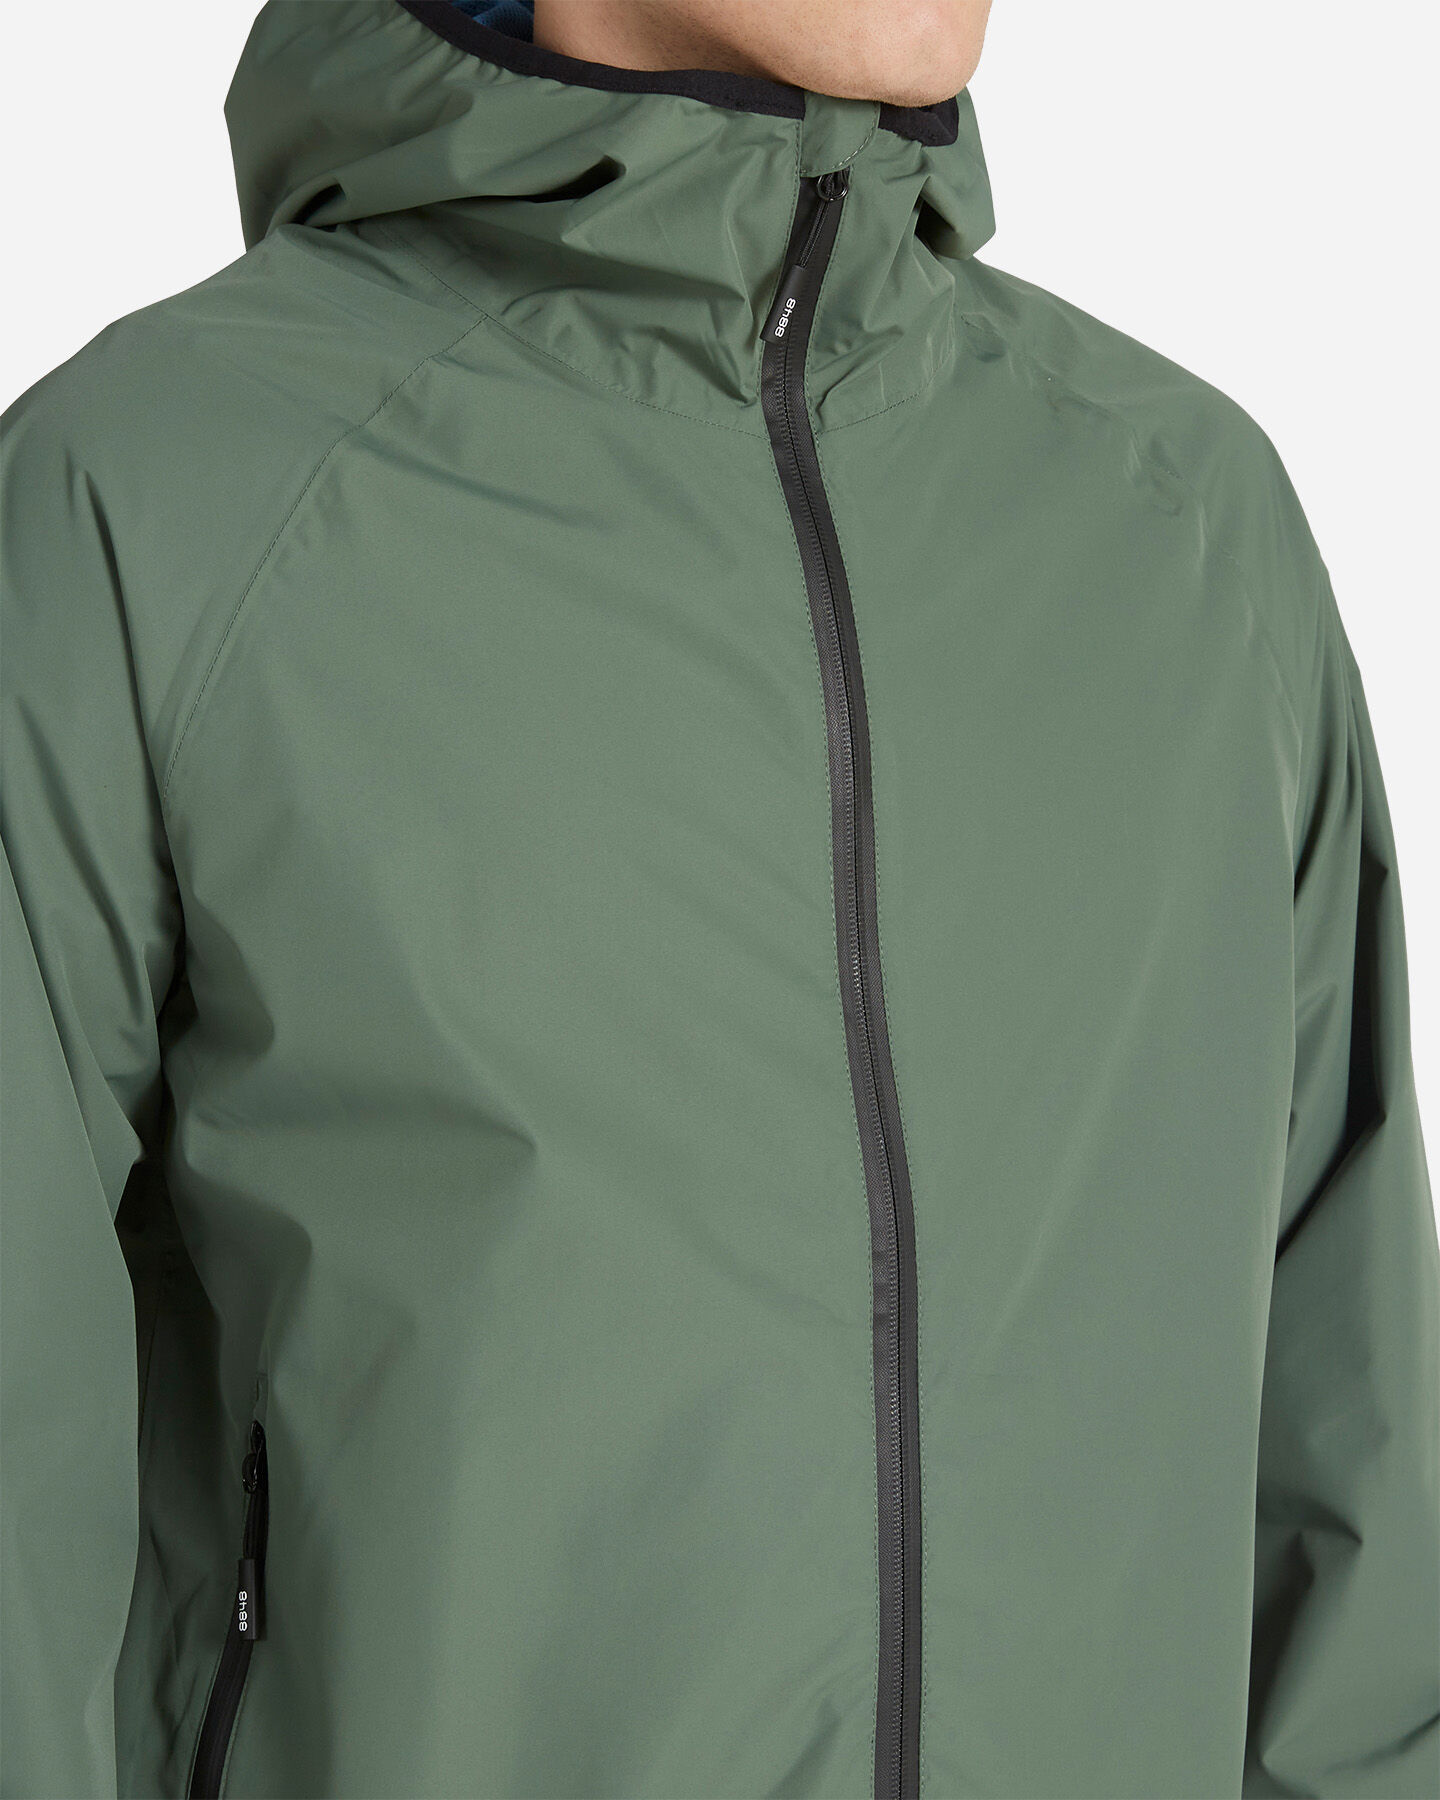  Giacca outdoor 8848 DUCK M S4121256|776/555|XL scatto 4